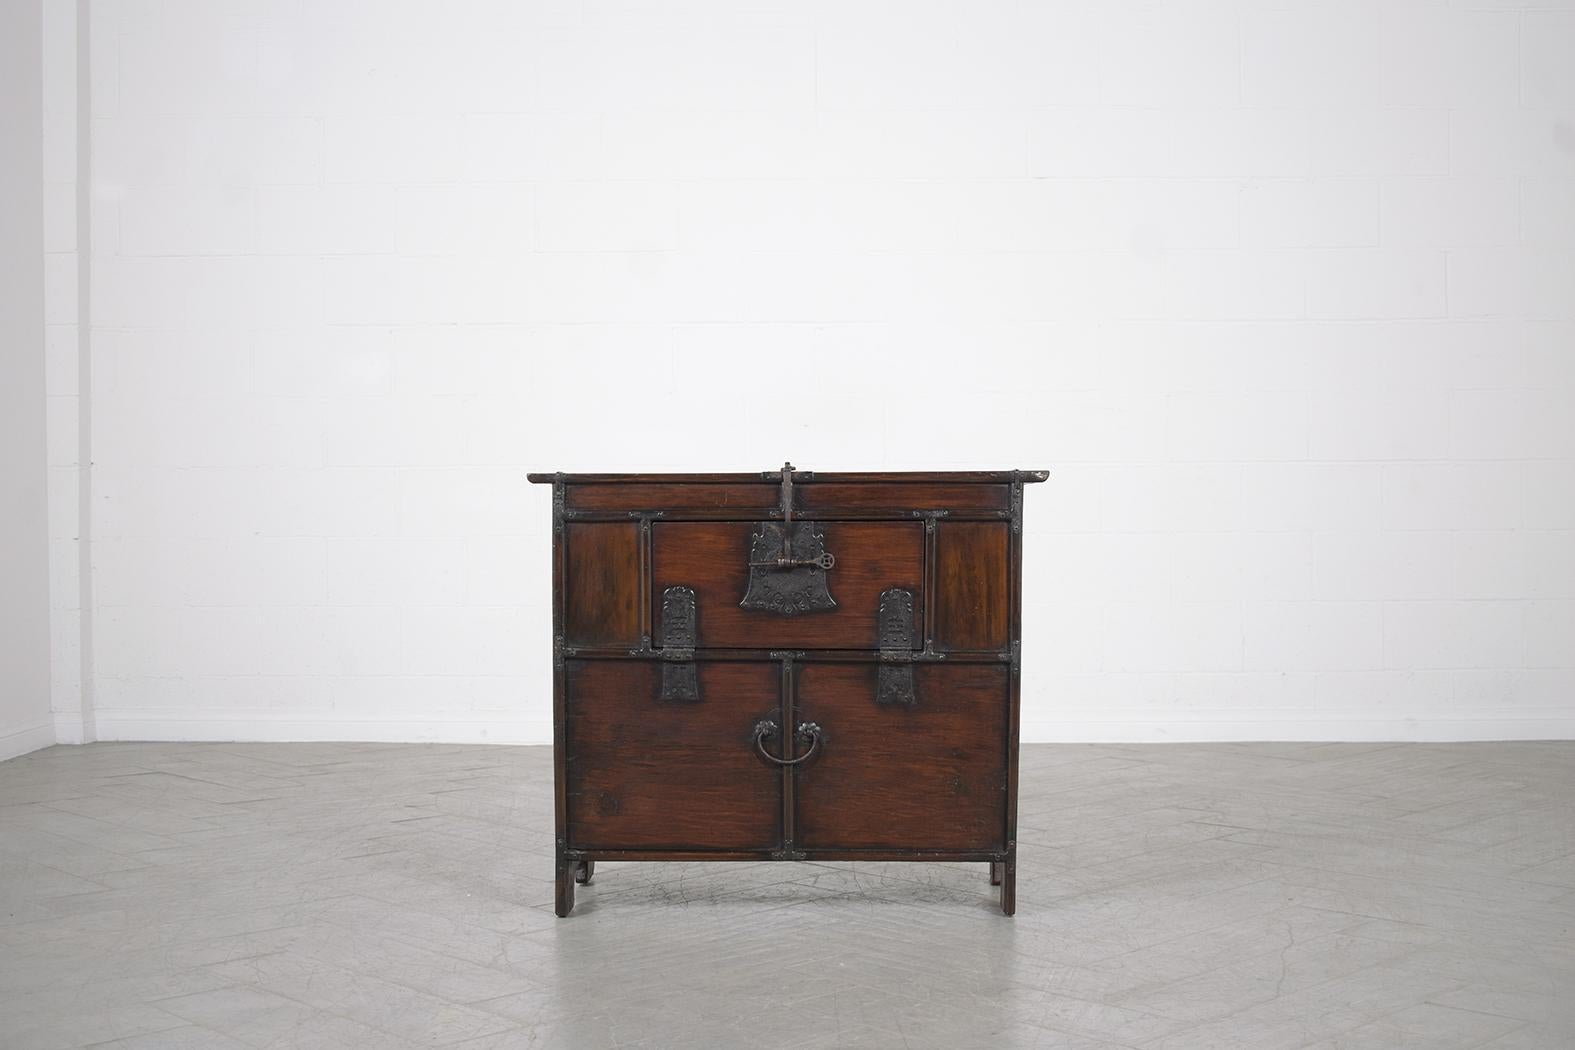 Carved 1900s Antique Japanese Elm Wood Cabinet with Iron Hardware & Patina Finish For Sale